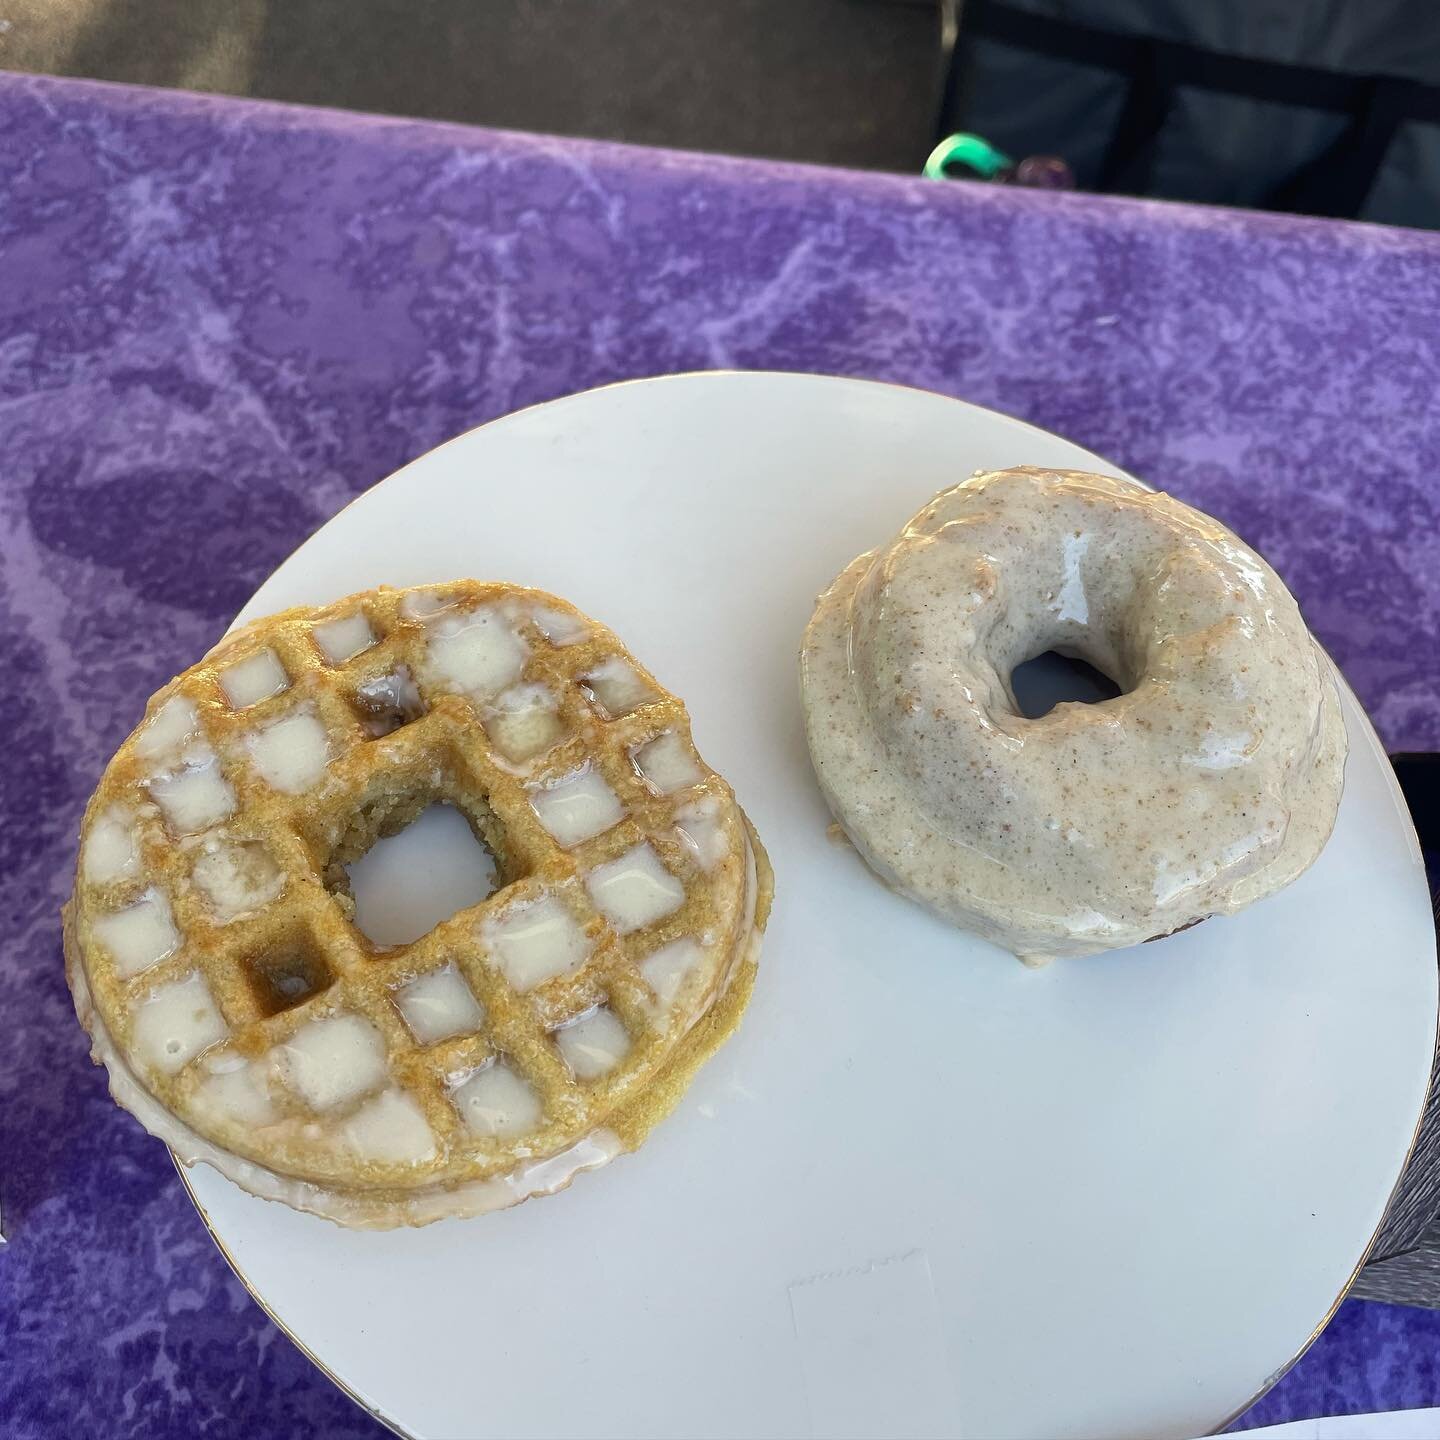 We have hot breakfast and donuts that look like waffles here @cornermarketgso !! It&rsquo;s magic and delicious and we can&rsquo;t wait to see you! 
.
.
.
.
#vegan #vegancooking #veganbaking #veganchef #vegandonuts #shoplocal #supportsmallbusiness #l